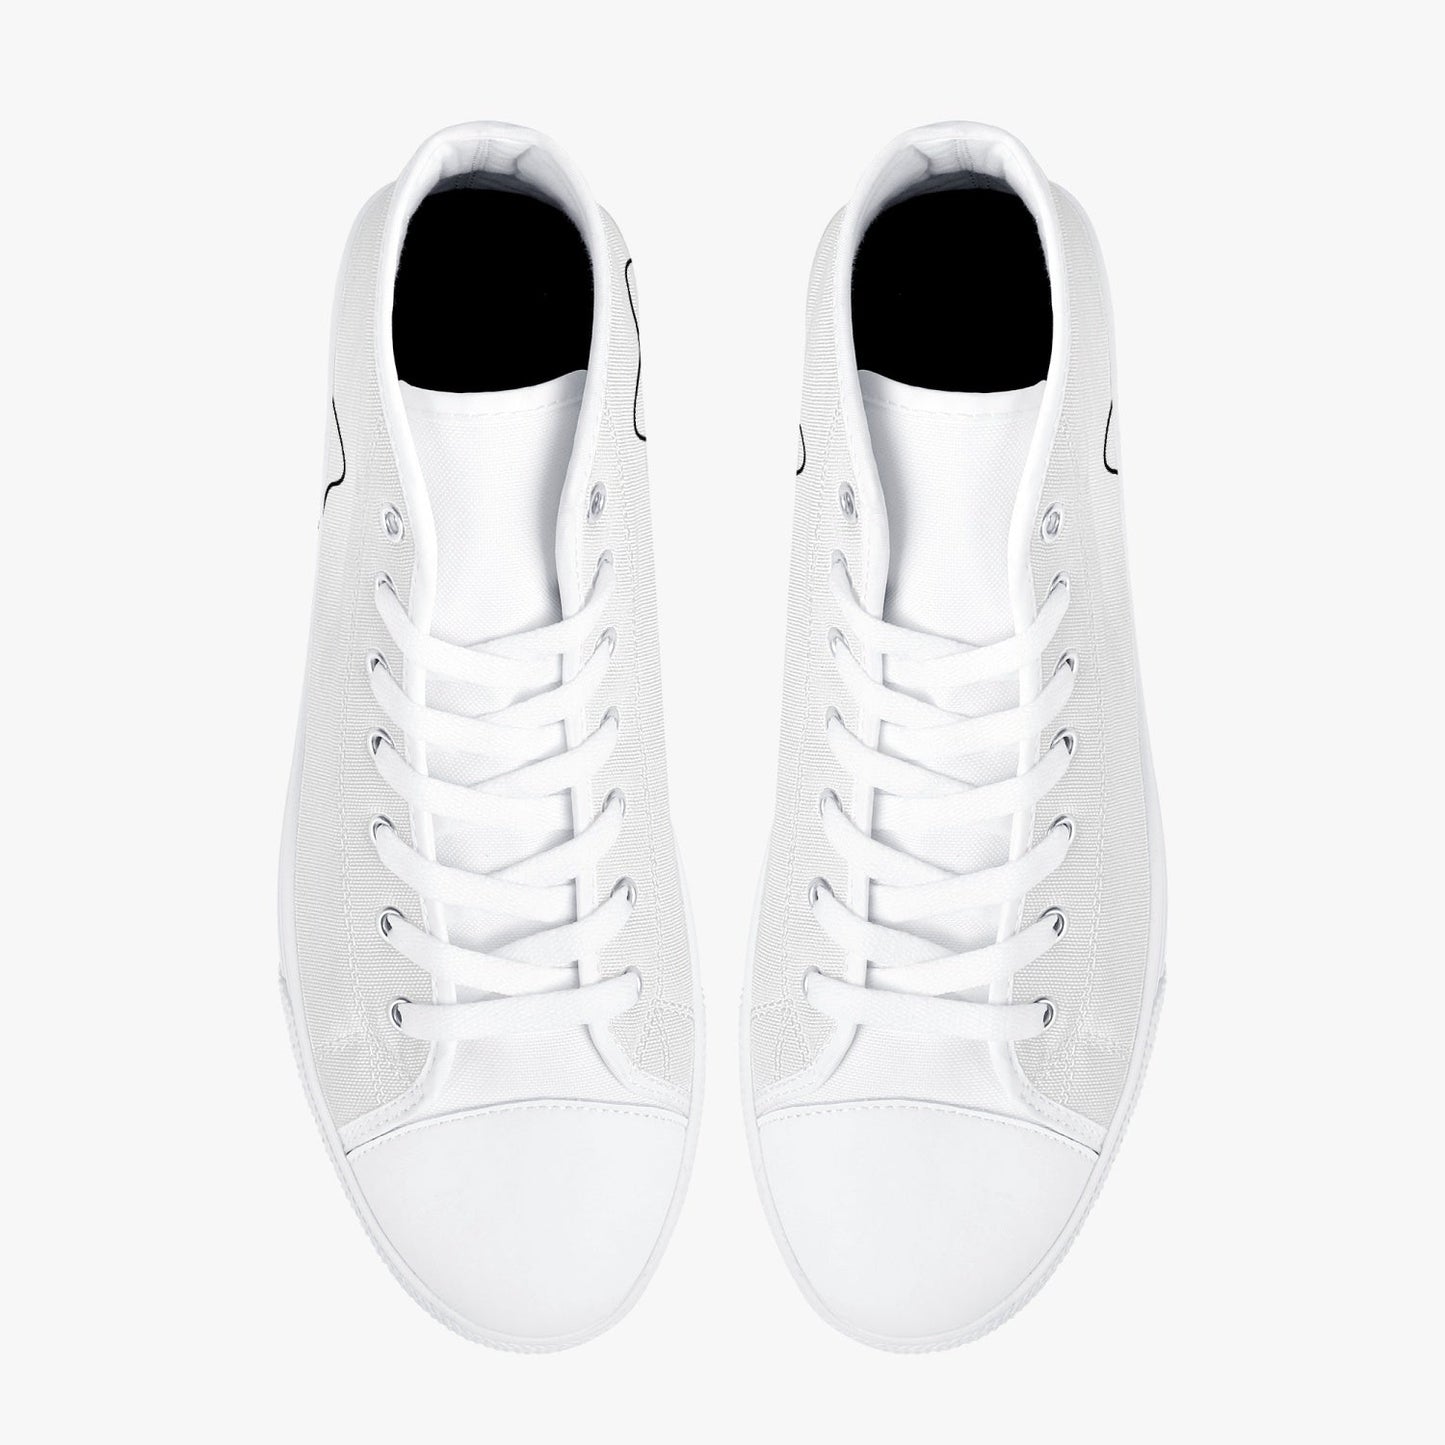 Jacki Easlick Lux Egg Classic High-Top Canvas Sneakers - White/Black